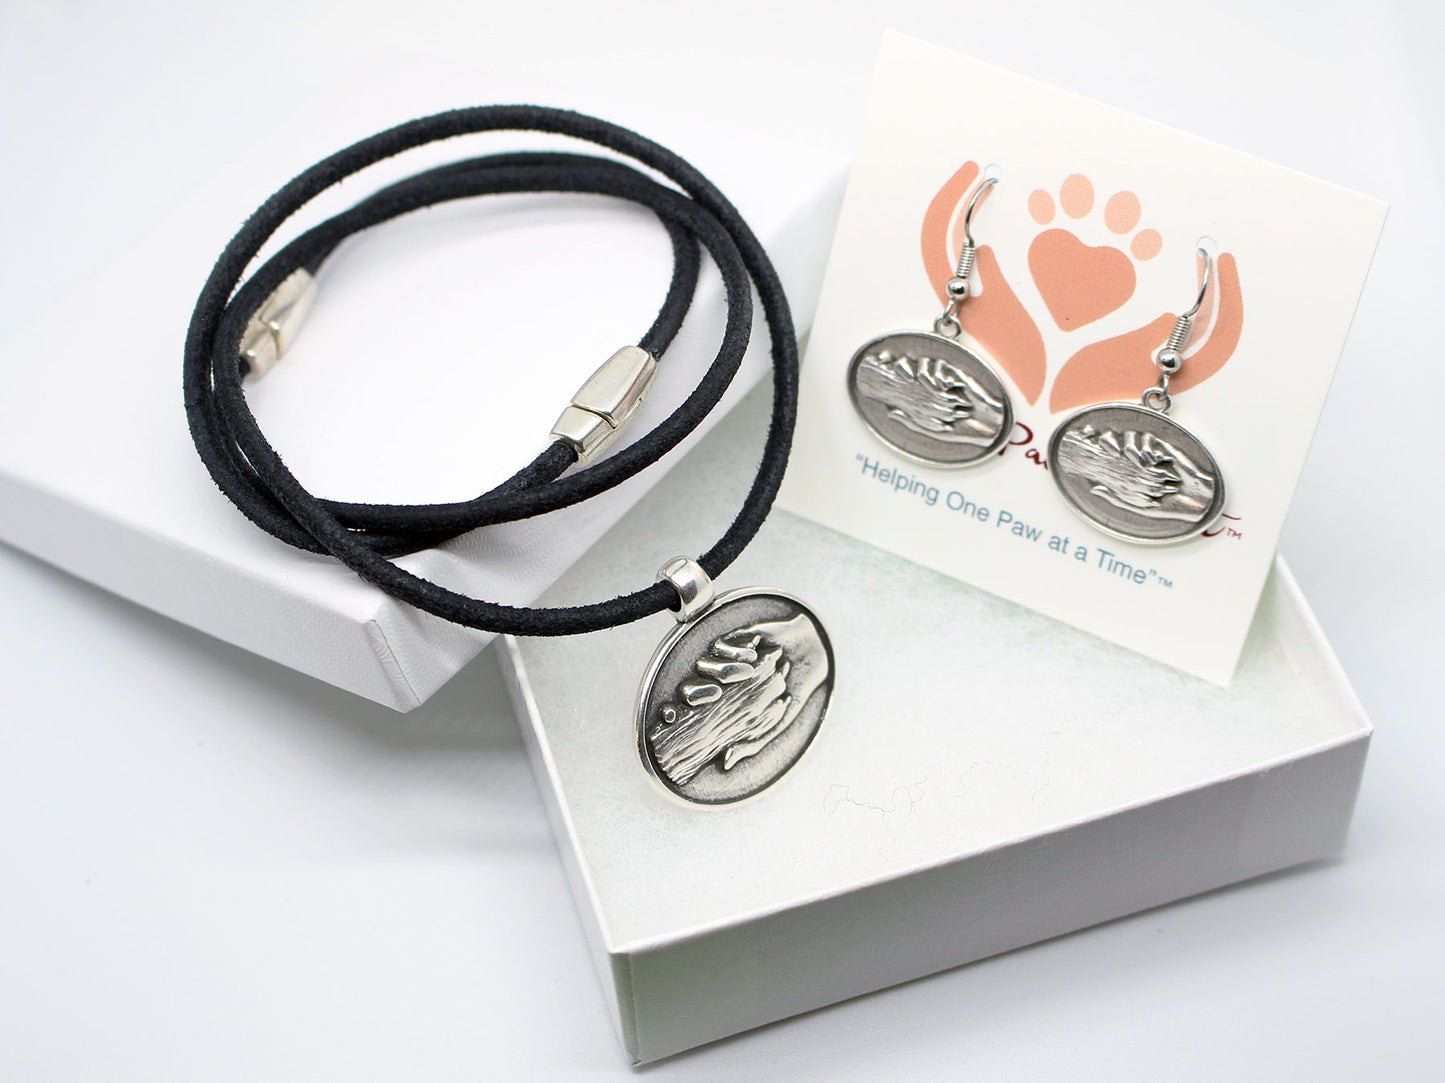 Hand and Dog's Paw Earrings and Pendant Gift Set